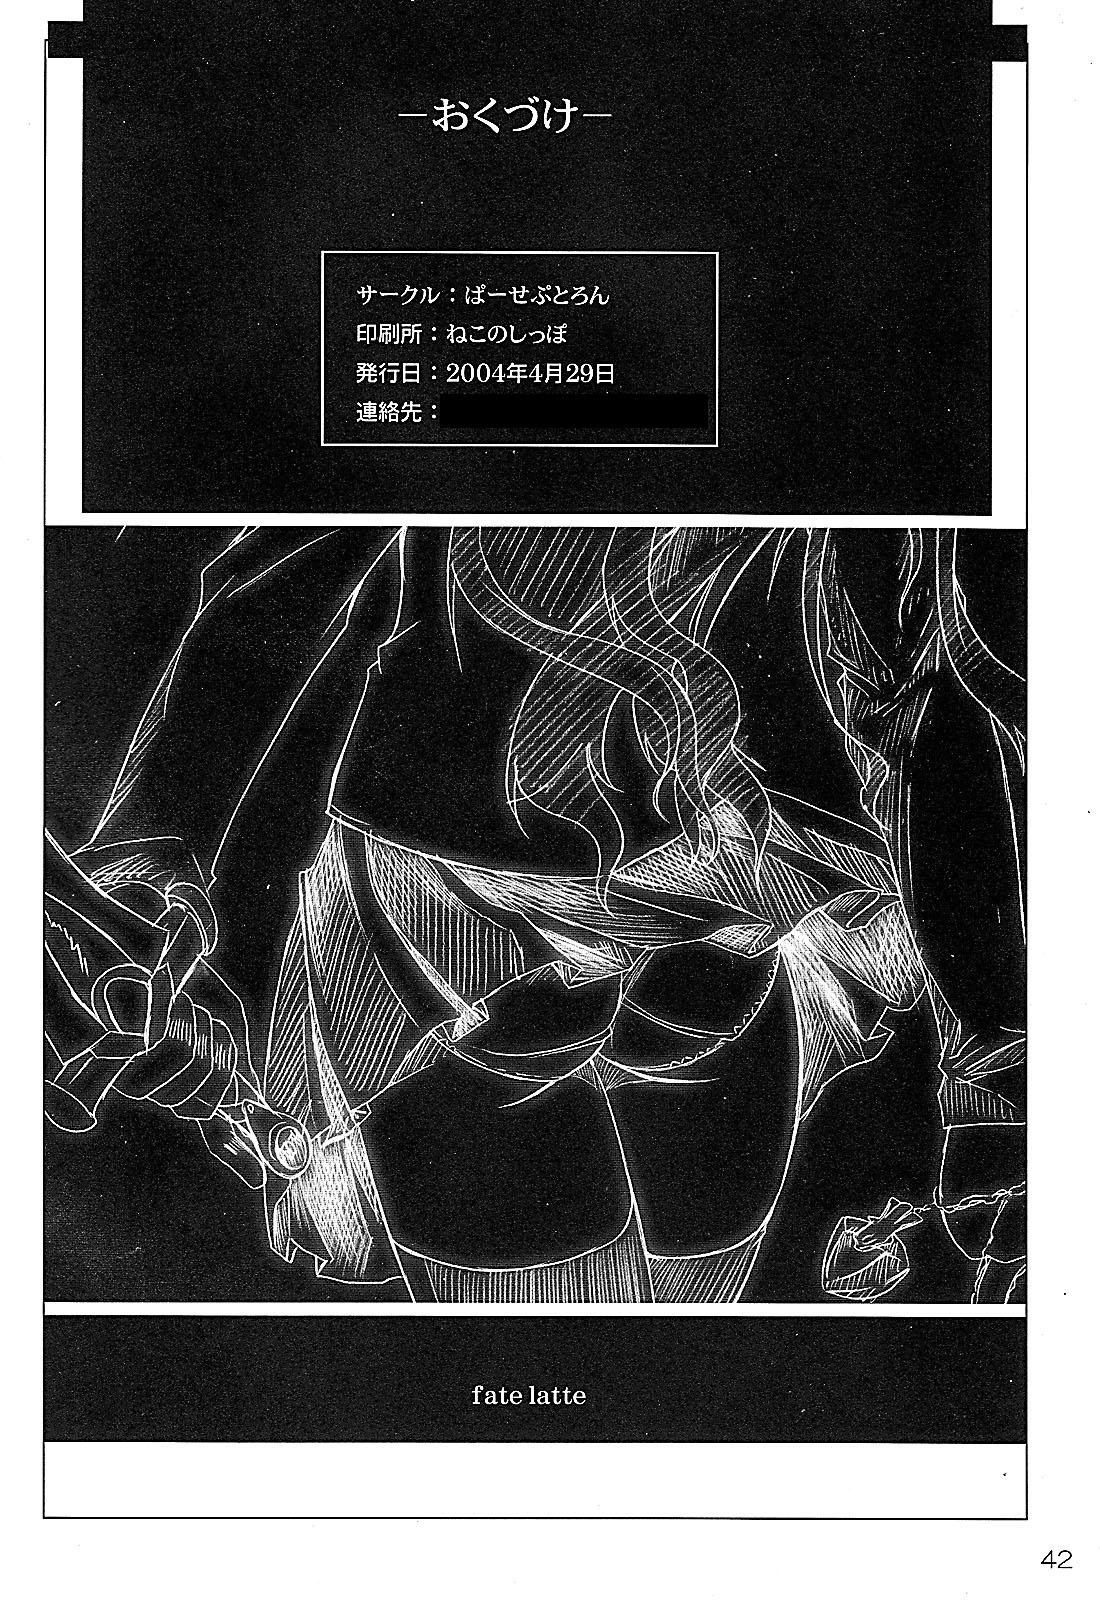 Spooning FATE LATTE - Fate stay night Bedroom - Page 42